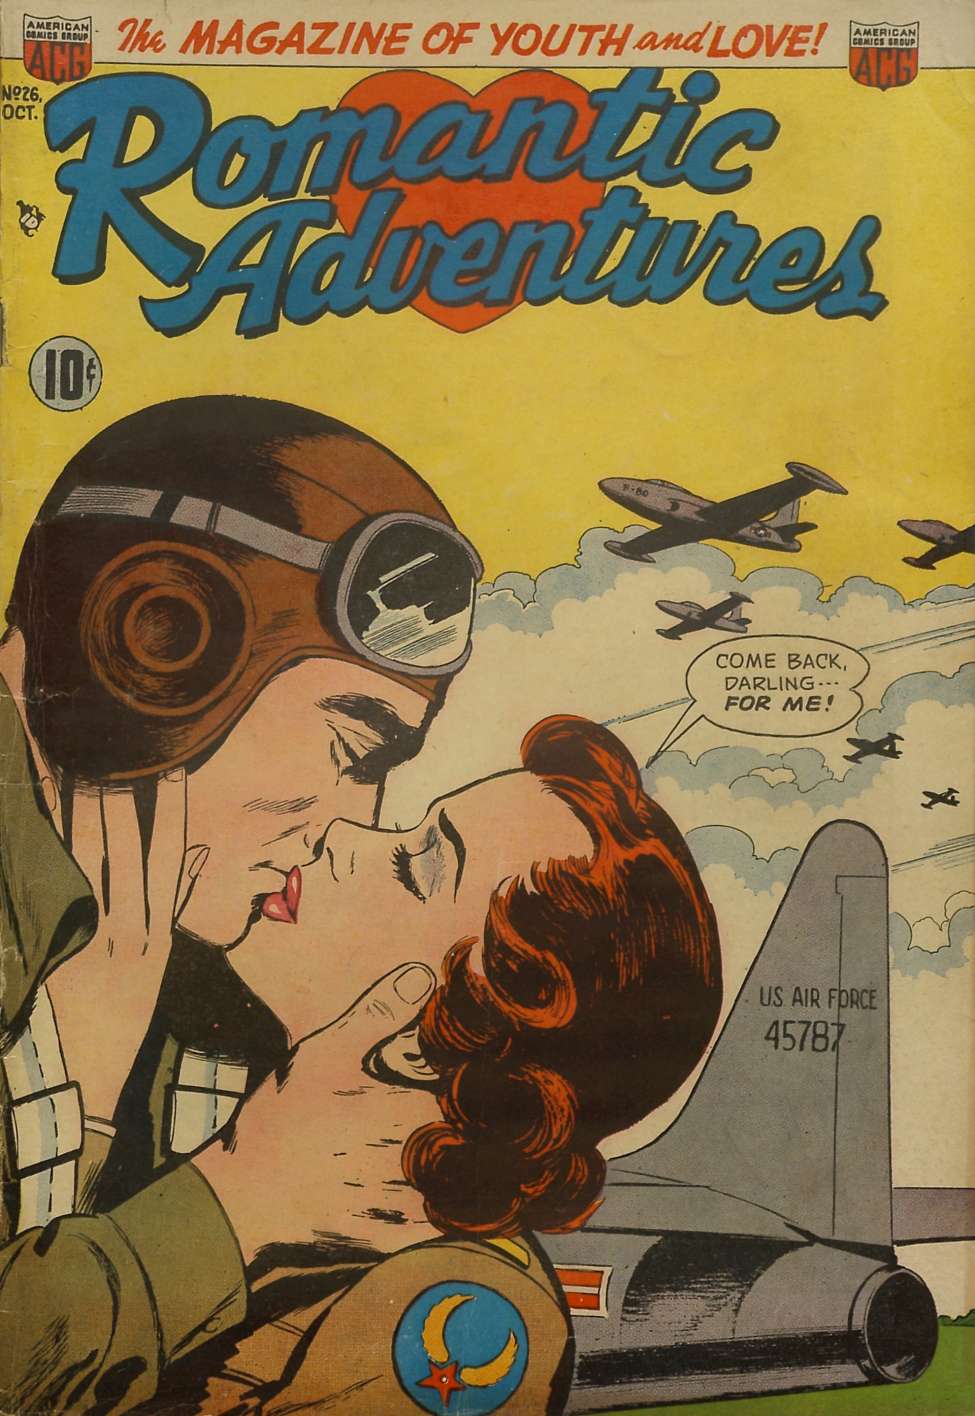 Book Cover For Romantic Adventures 26 - Version 2